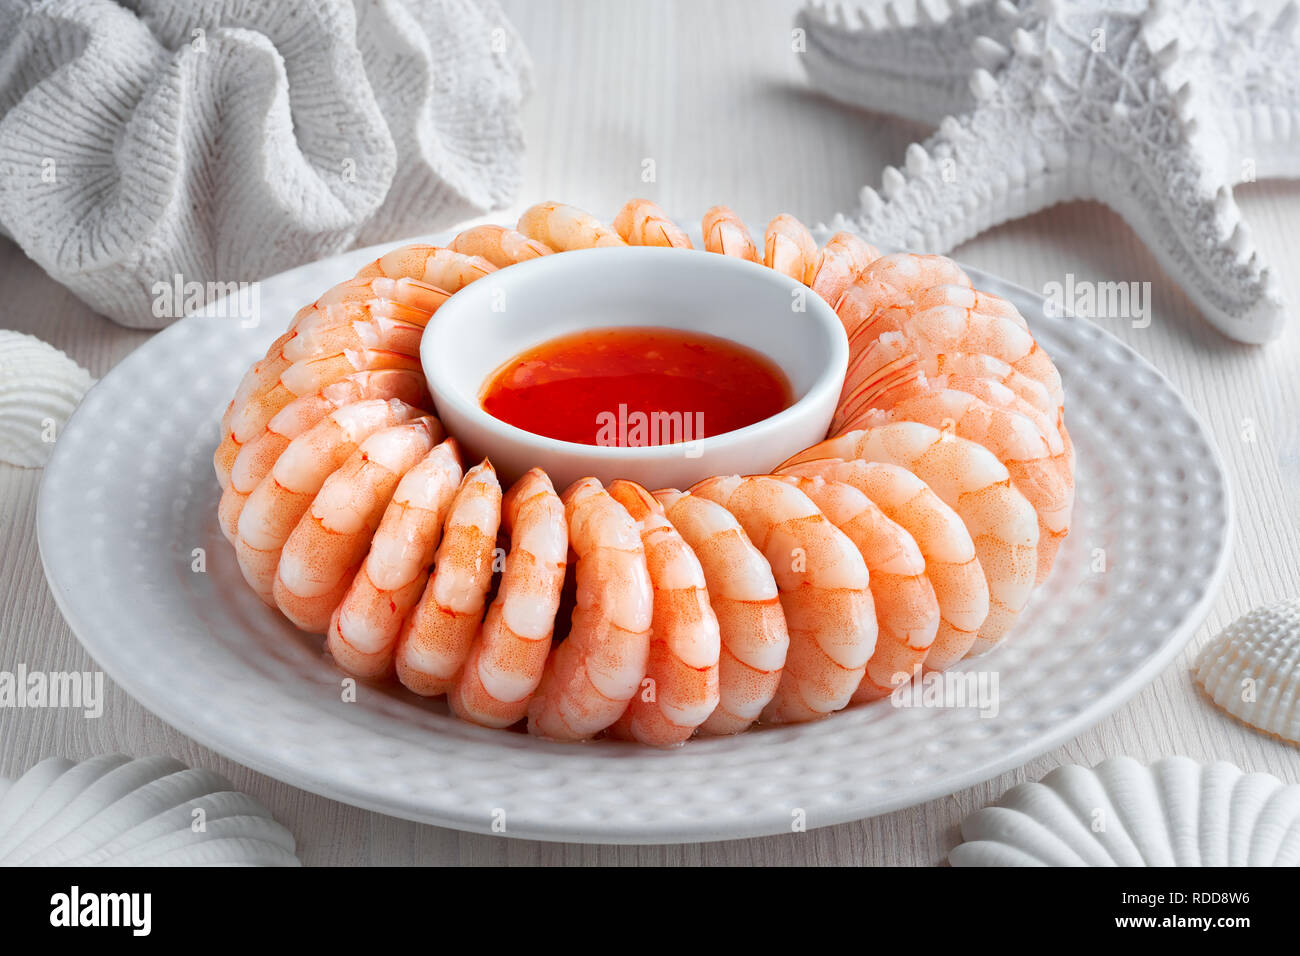 Close-up on shrimp ring with sause on light background with white sea decorations Stock Photo